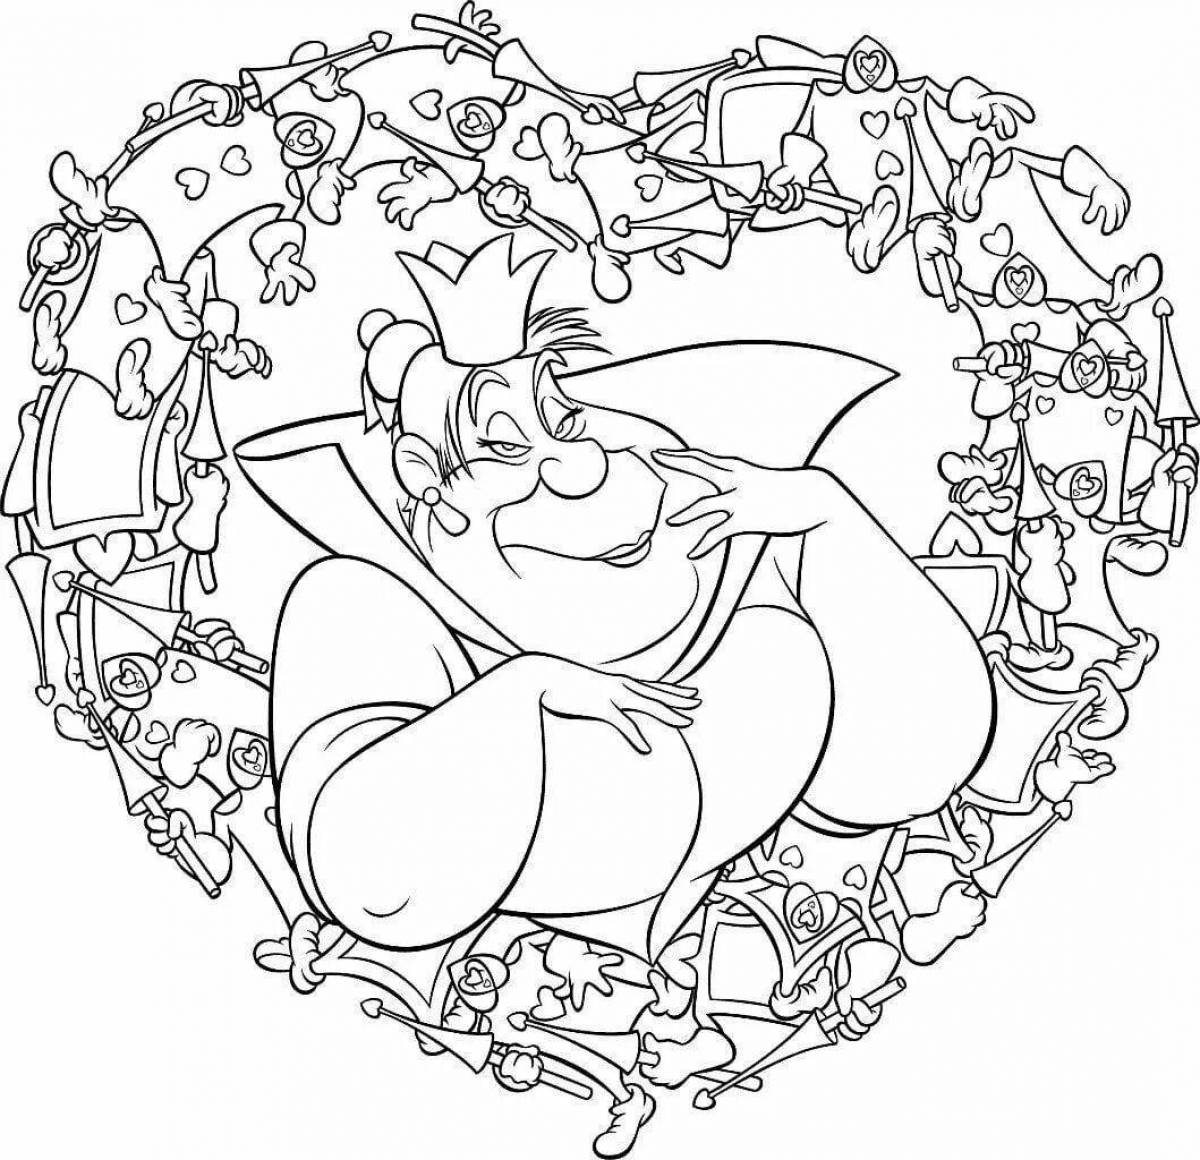 Colourful coloring pages alice dream for boys